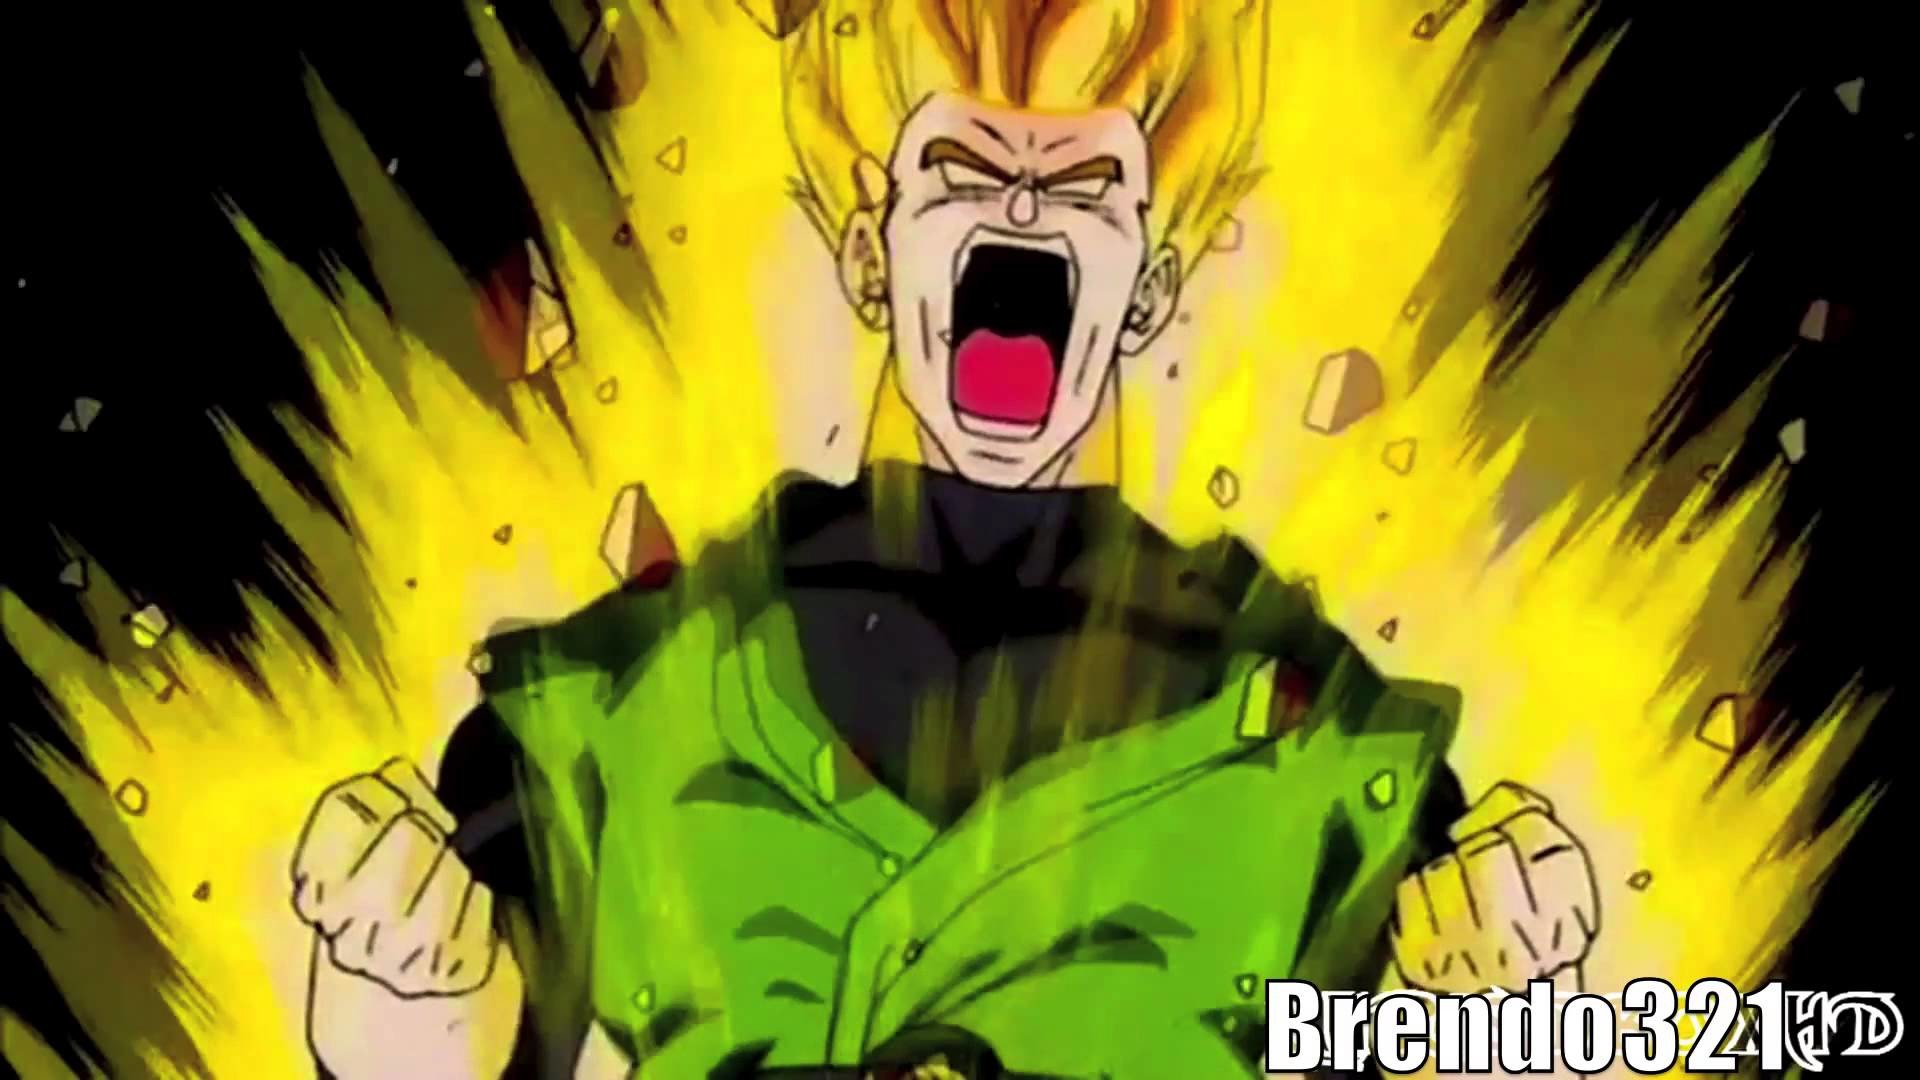 1920x1080 Gohan Goes SSJ2 At The Tournament Theme with Scene (1080p HD) - YouTube